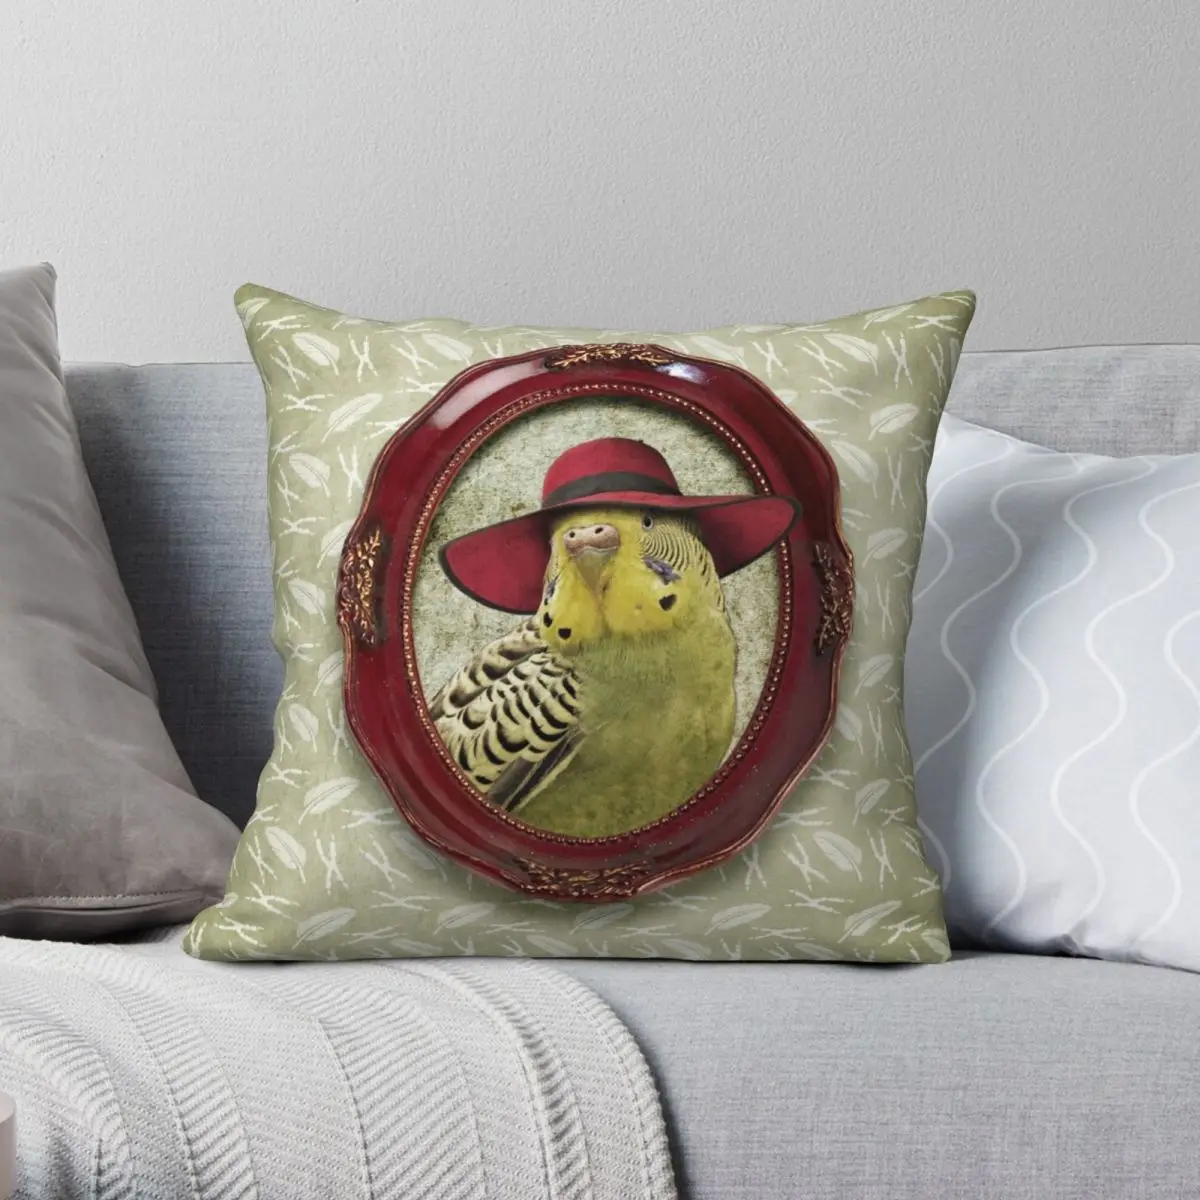 Green Budgie In Red Hat Square Pillowcase Polyester Linen Velvet Creative Zip Decor Throw Pillow Case Room Cushion Cover